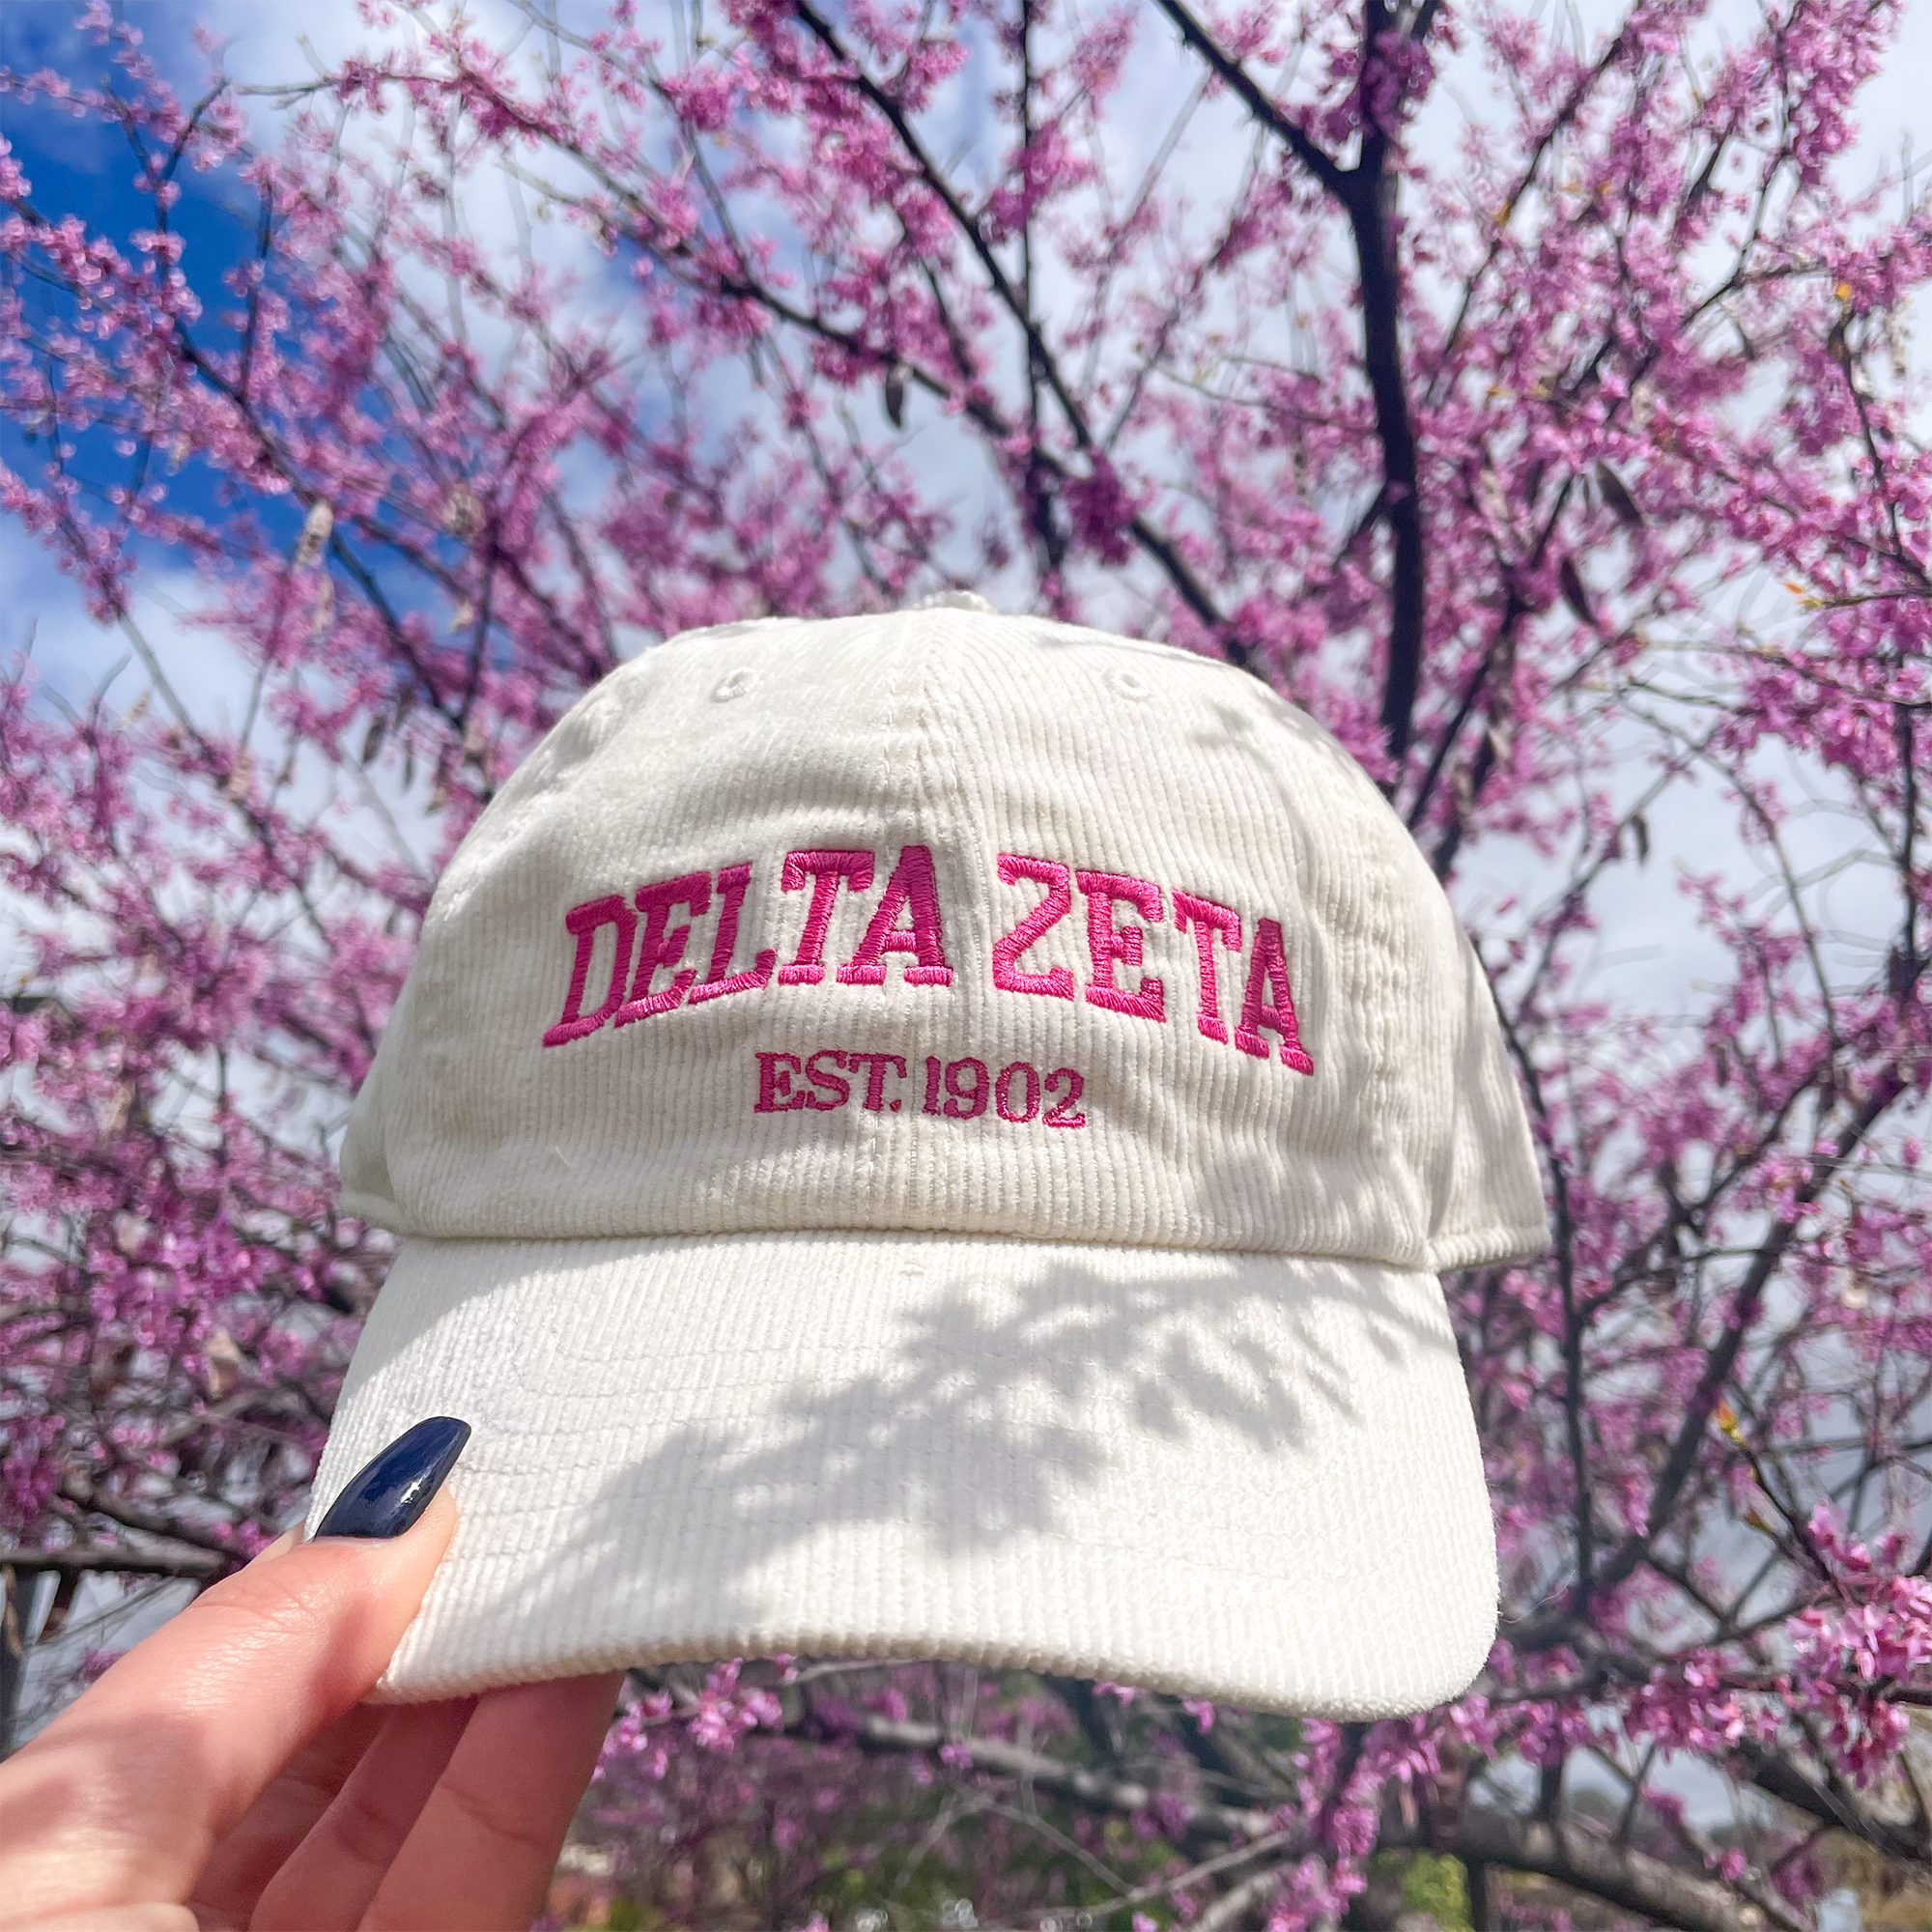 a white hat with the delta zeta embroidered on it